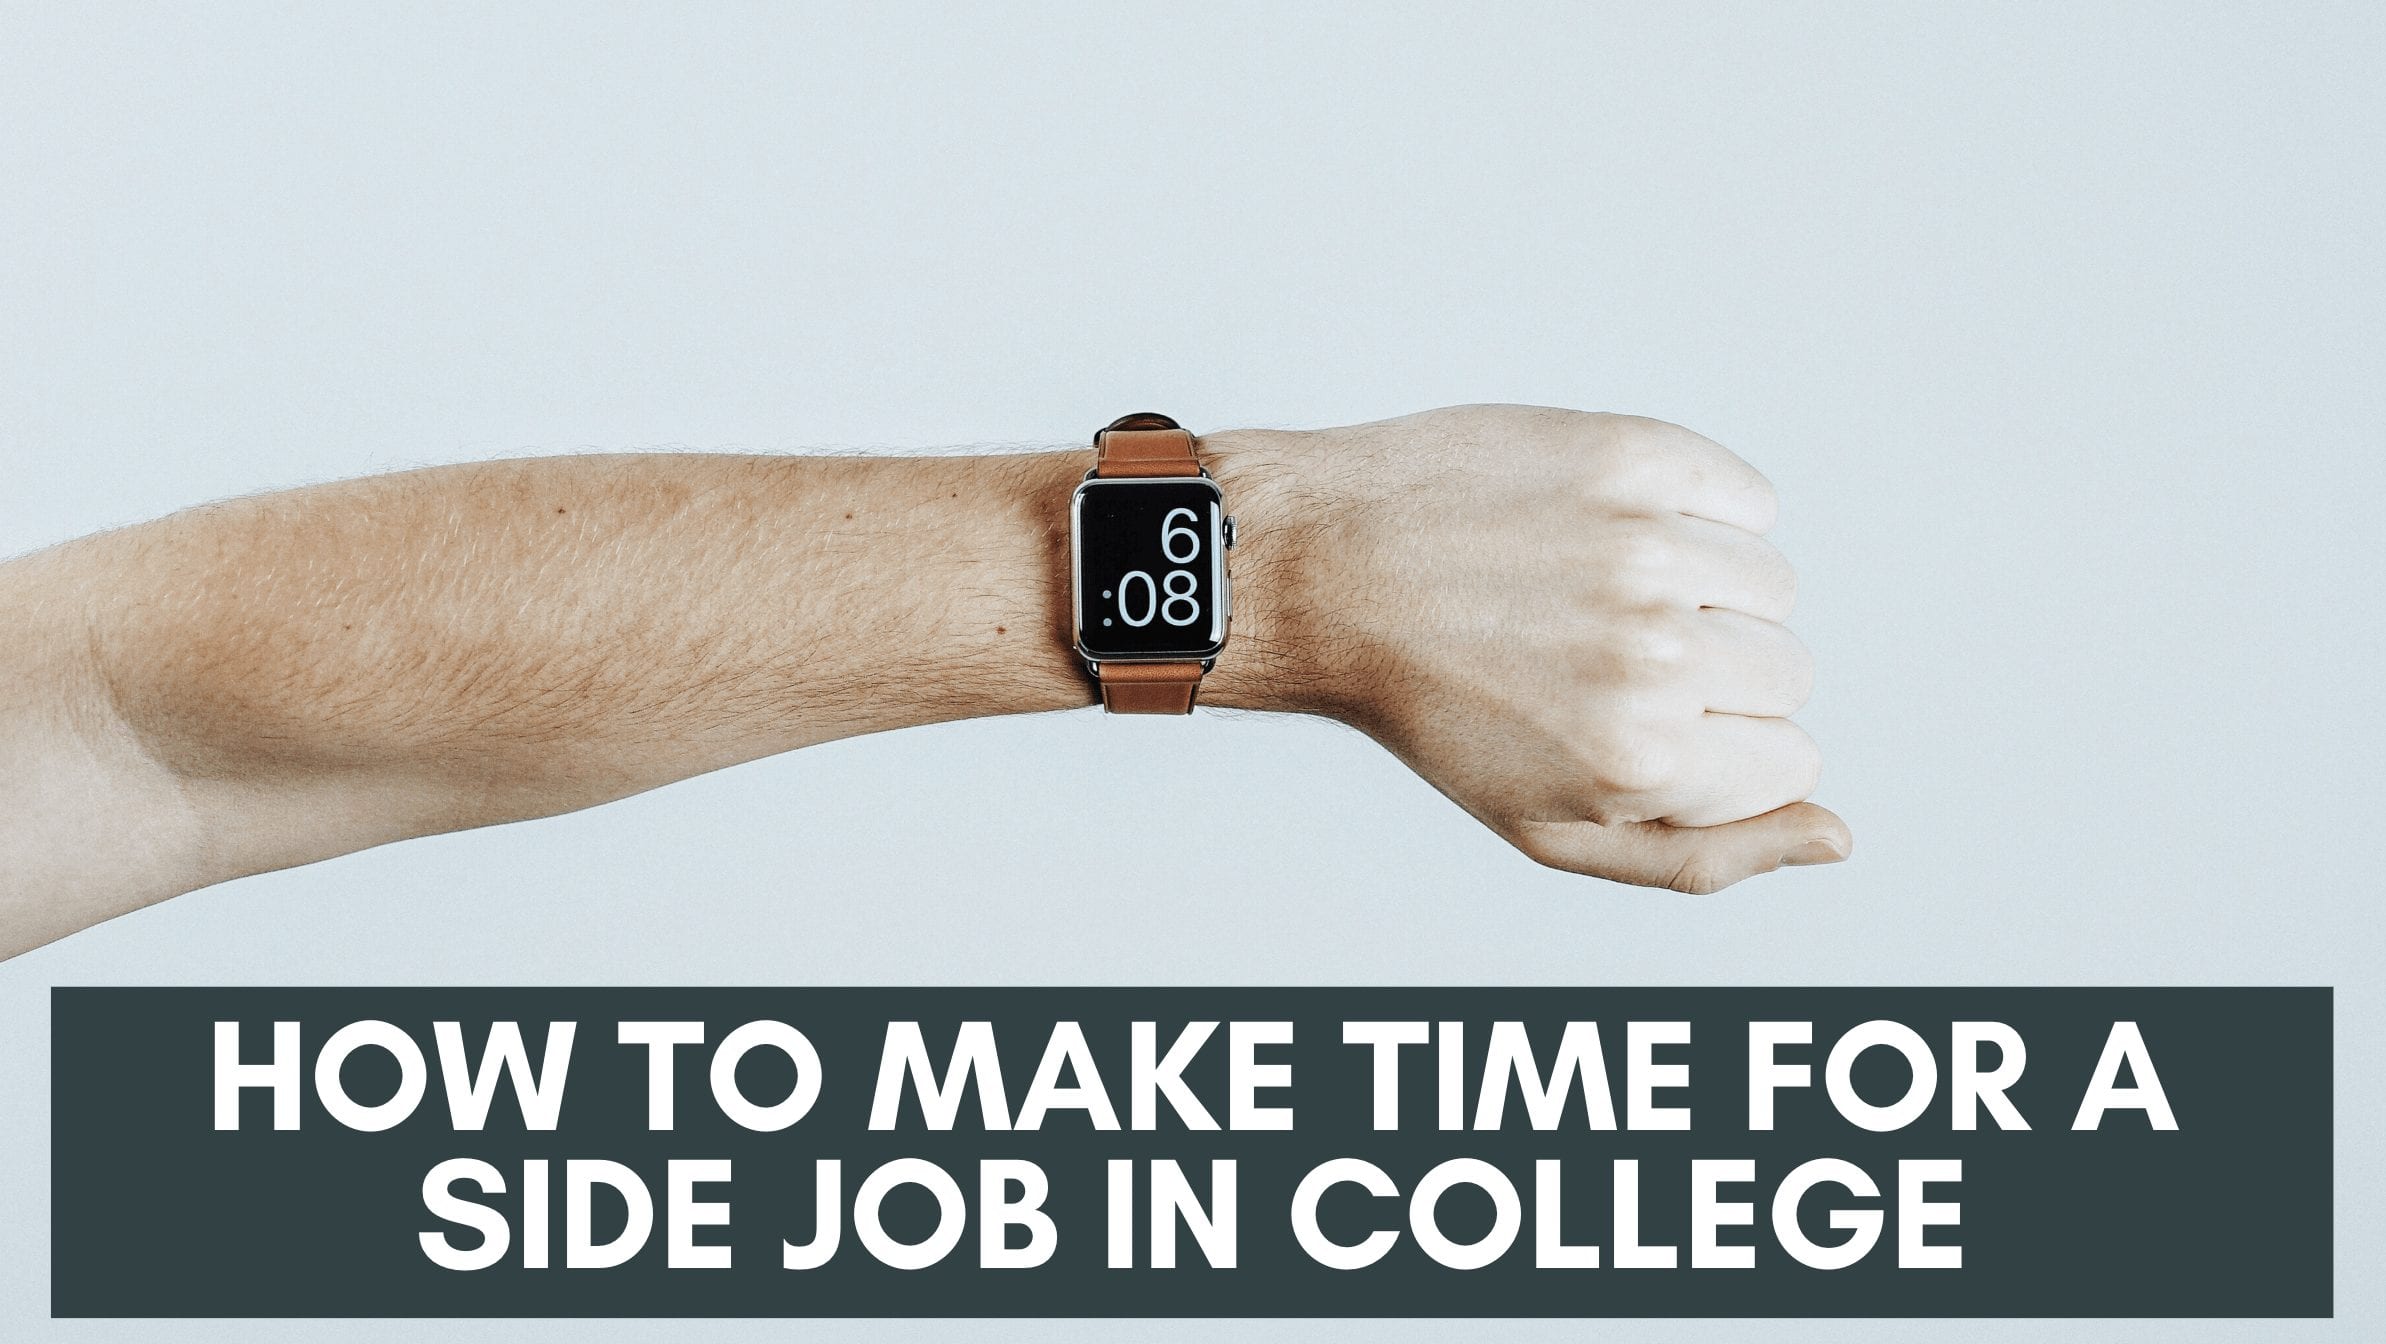 How to make time for a side job in college (full guide)